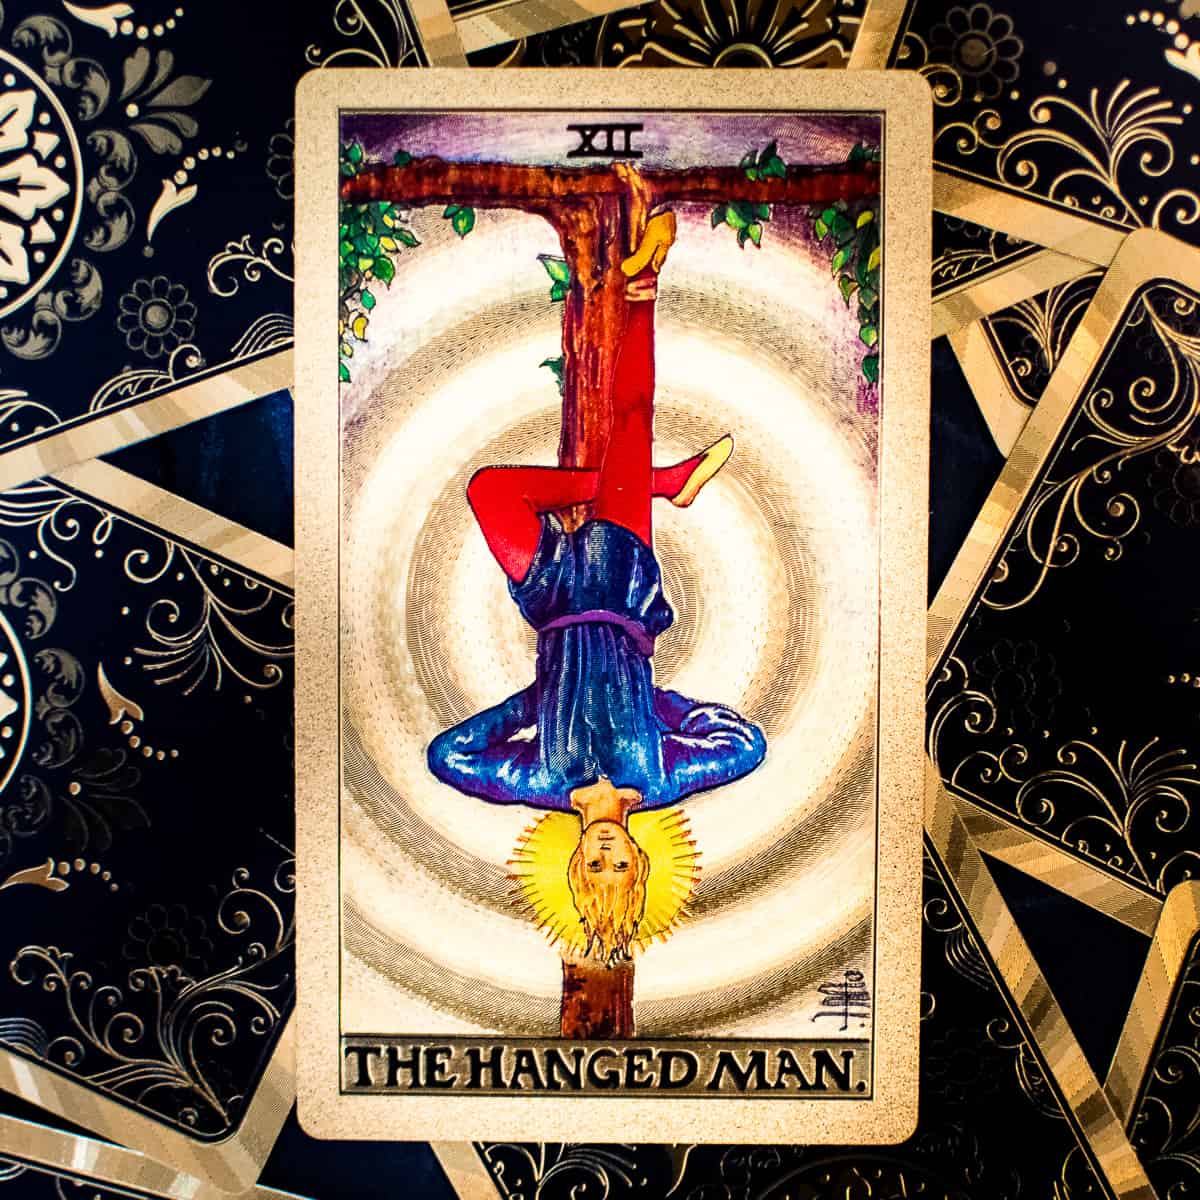 The Hanged Man tarot card depicts a man suspended upside down from a tree branch by his foot. 